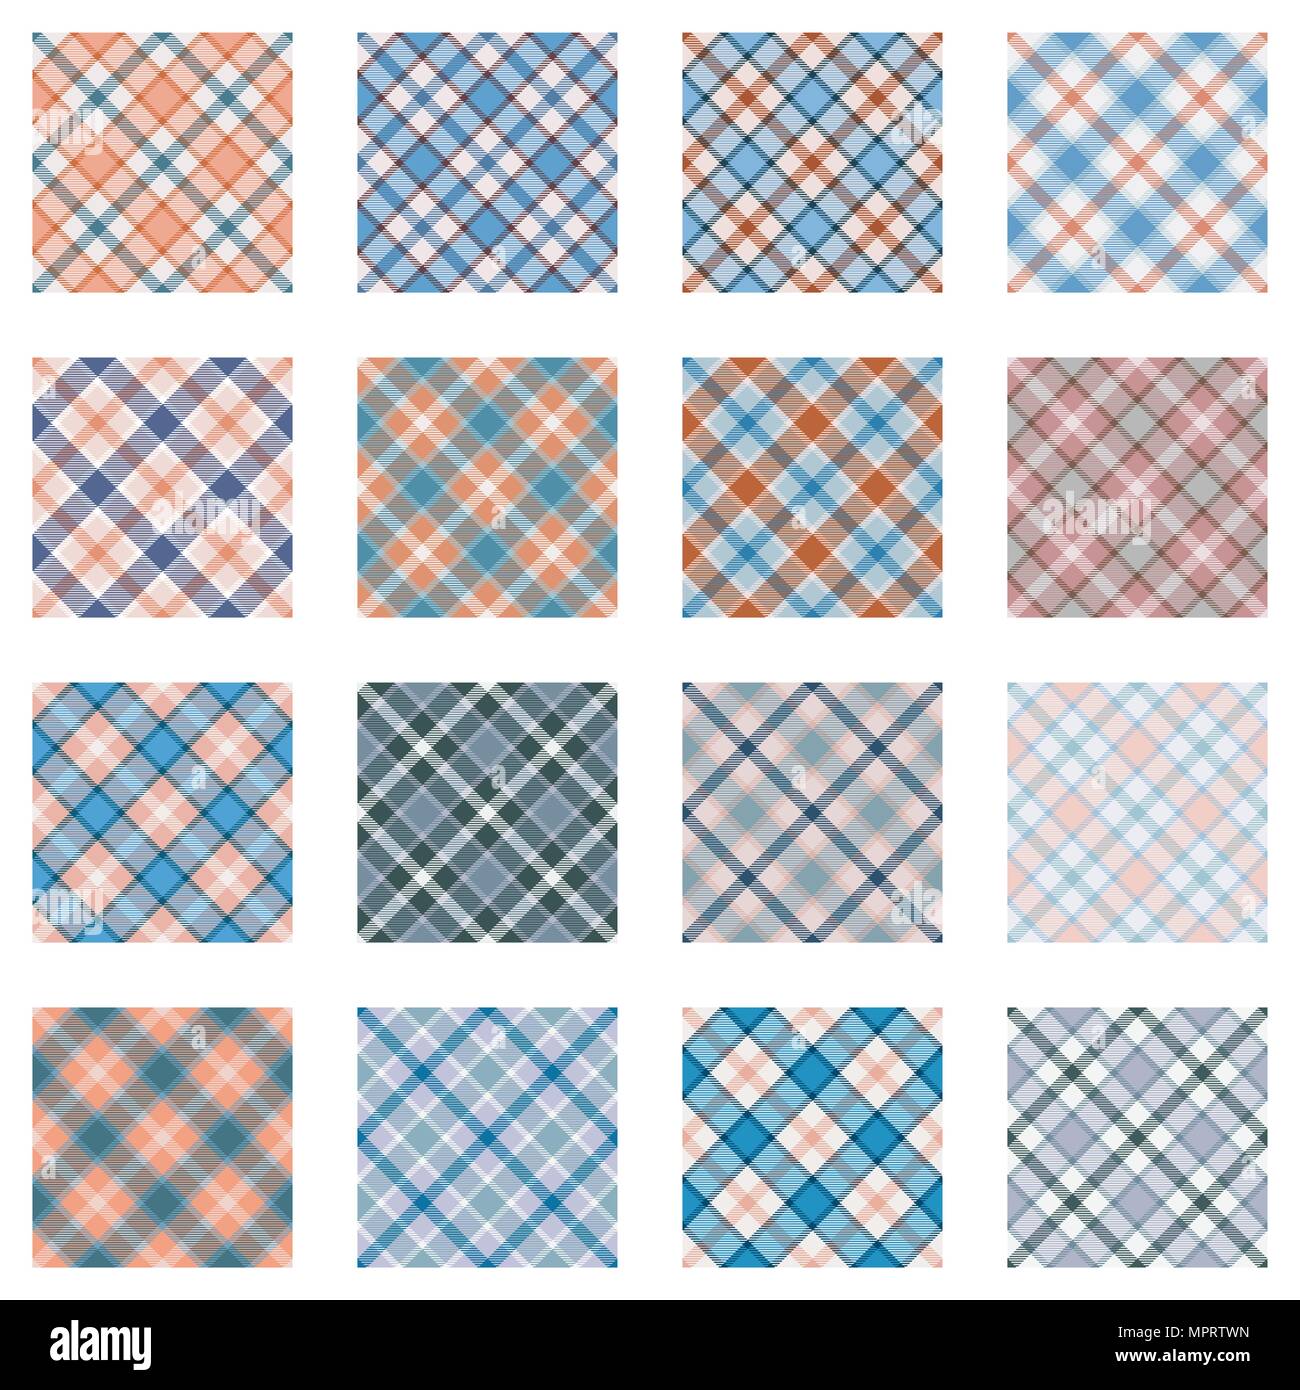 Plaid patterns collection, 16 seamless tartan patterns, light blue and red shades Stock Vector